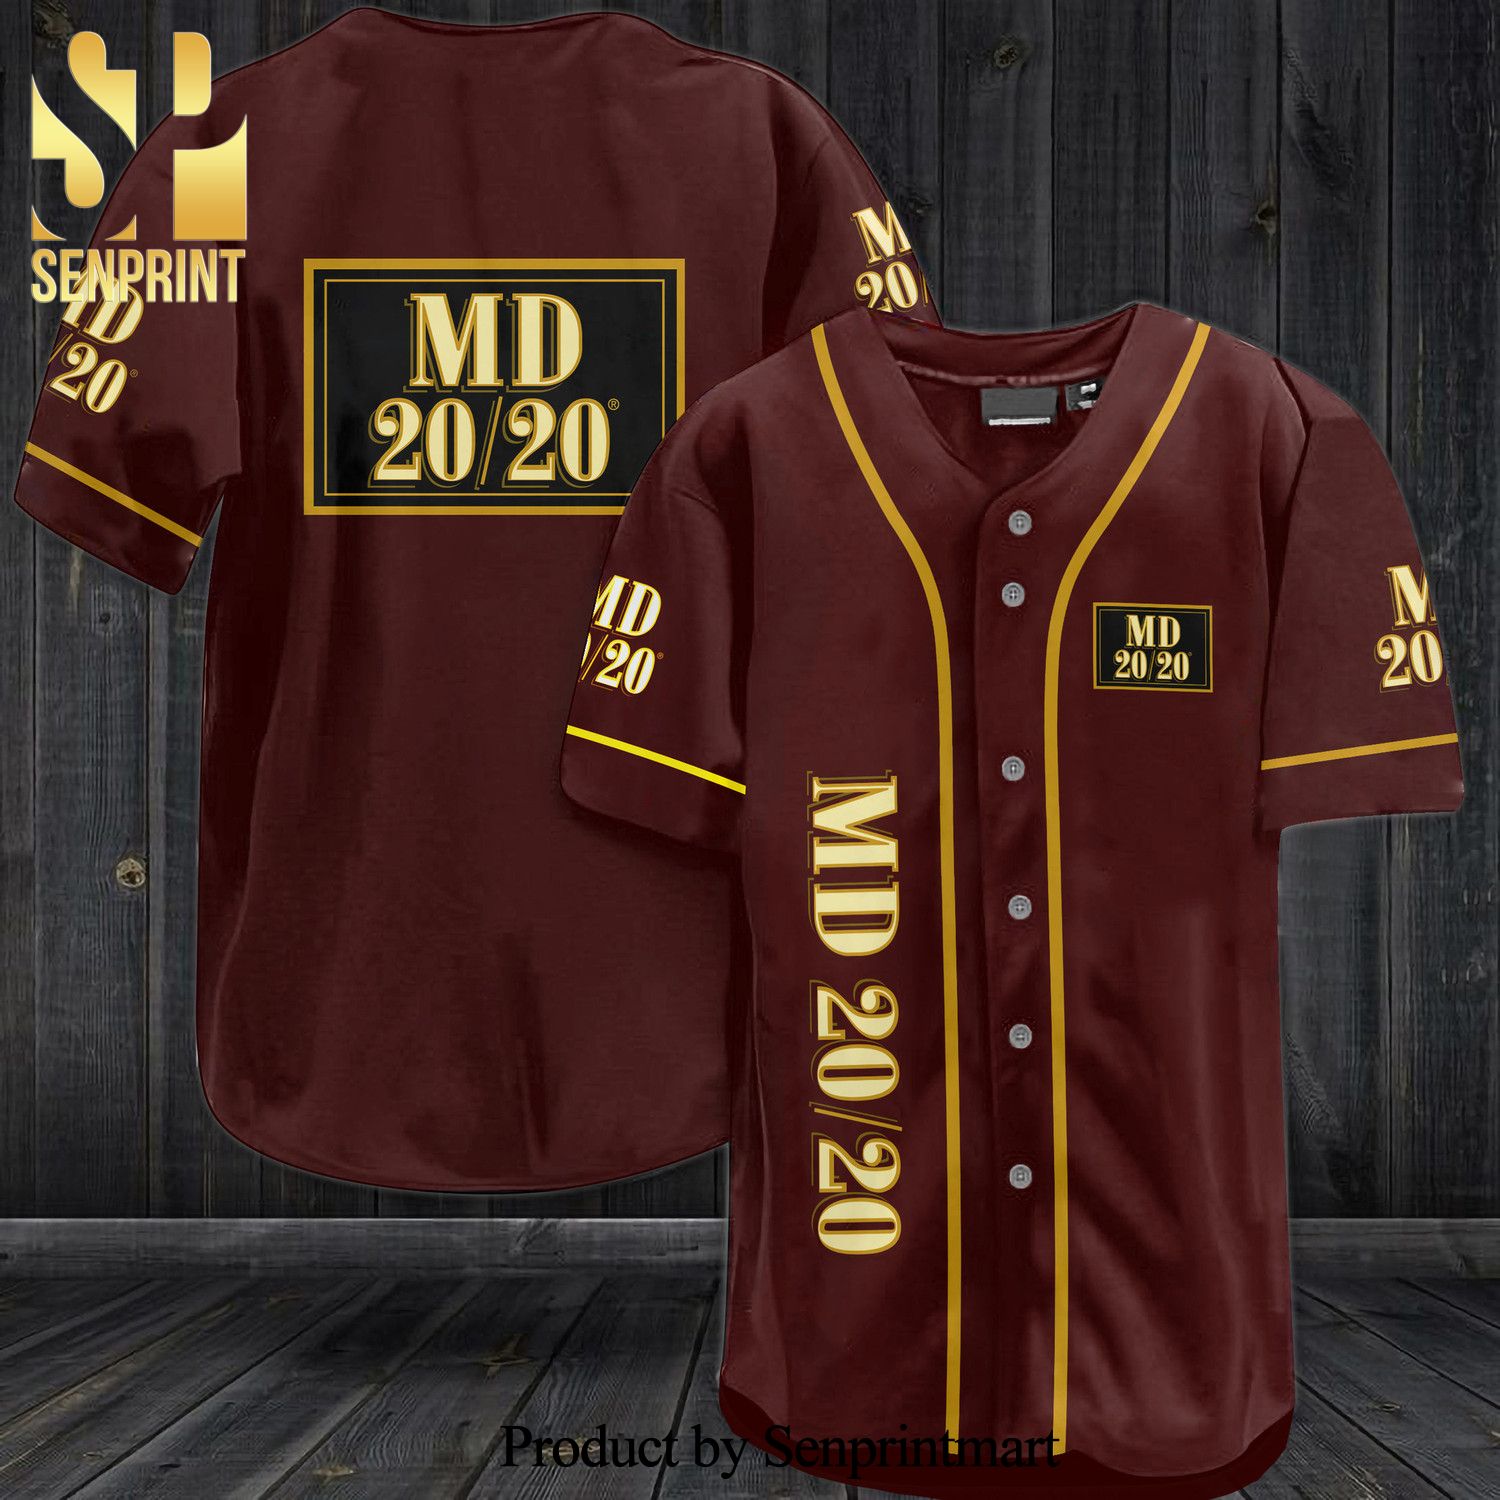 MD 20 20 All Over Print Baseball Jersey